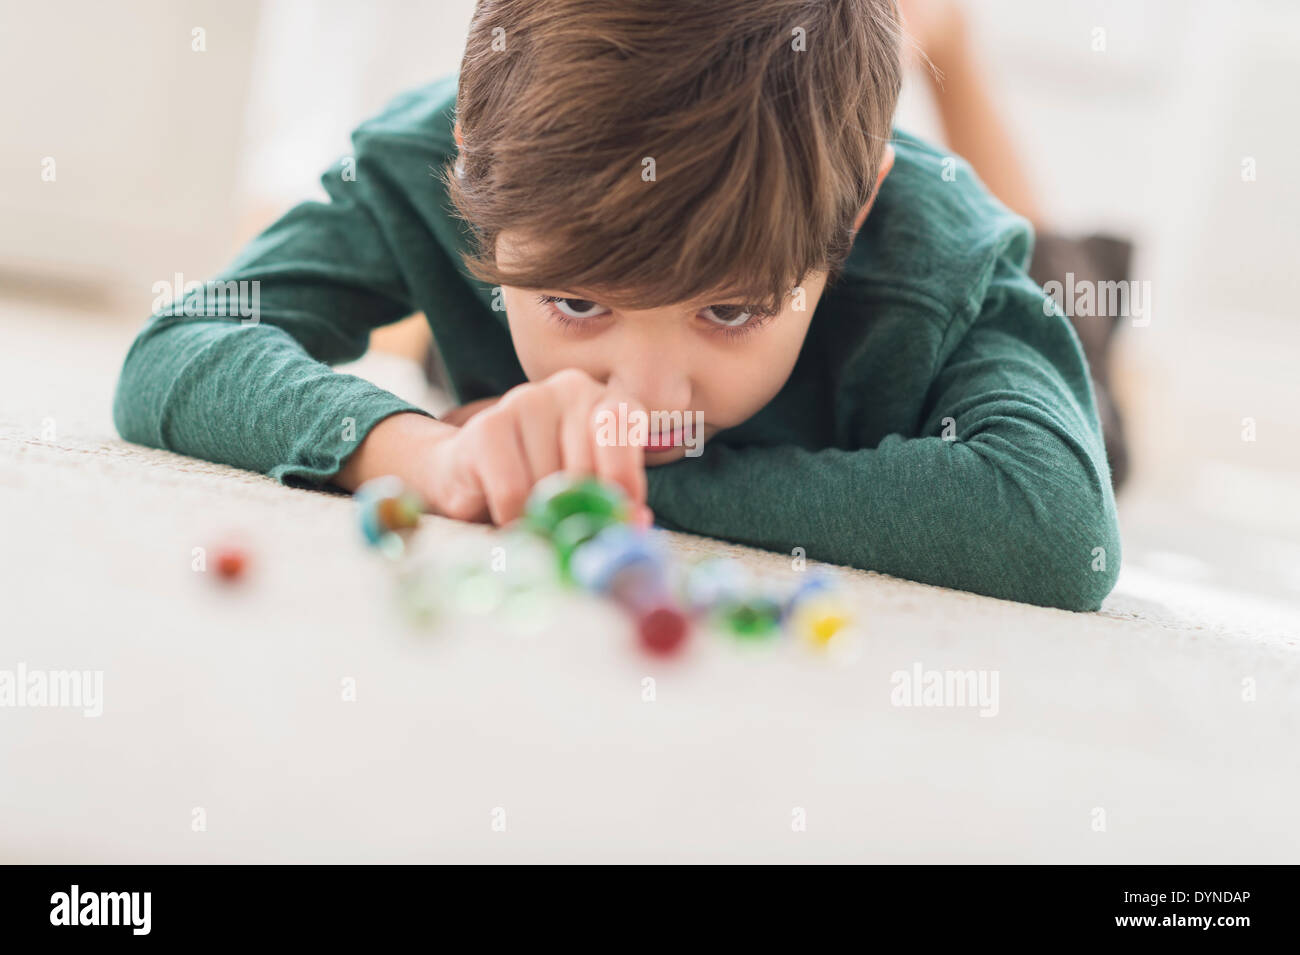 Hispanic boy playing with marbles on bedroom floor Stock Photo